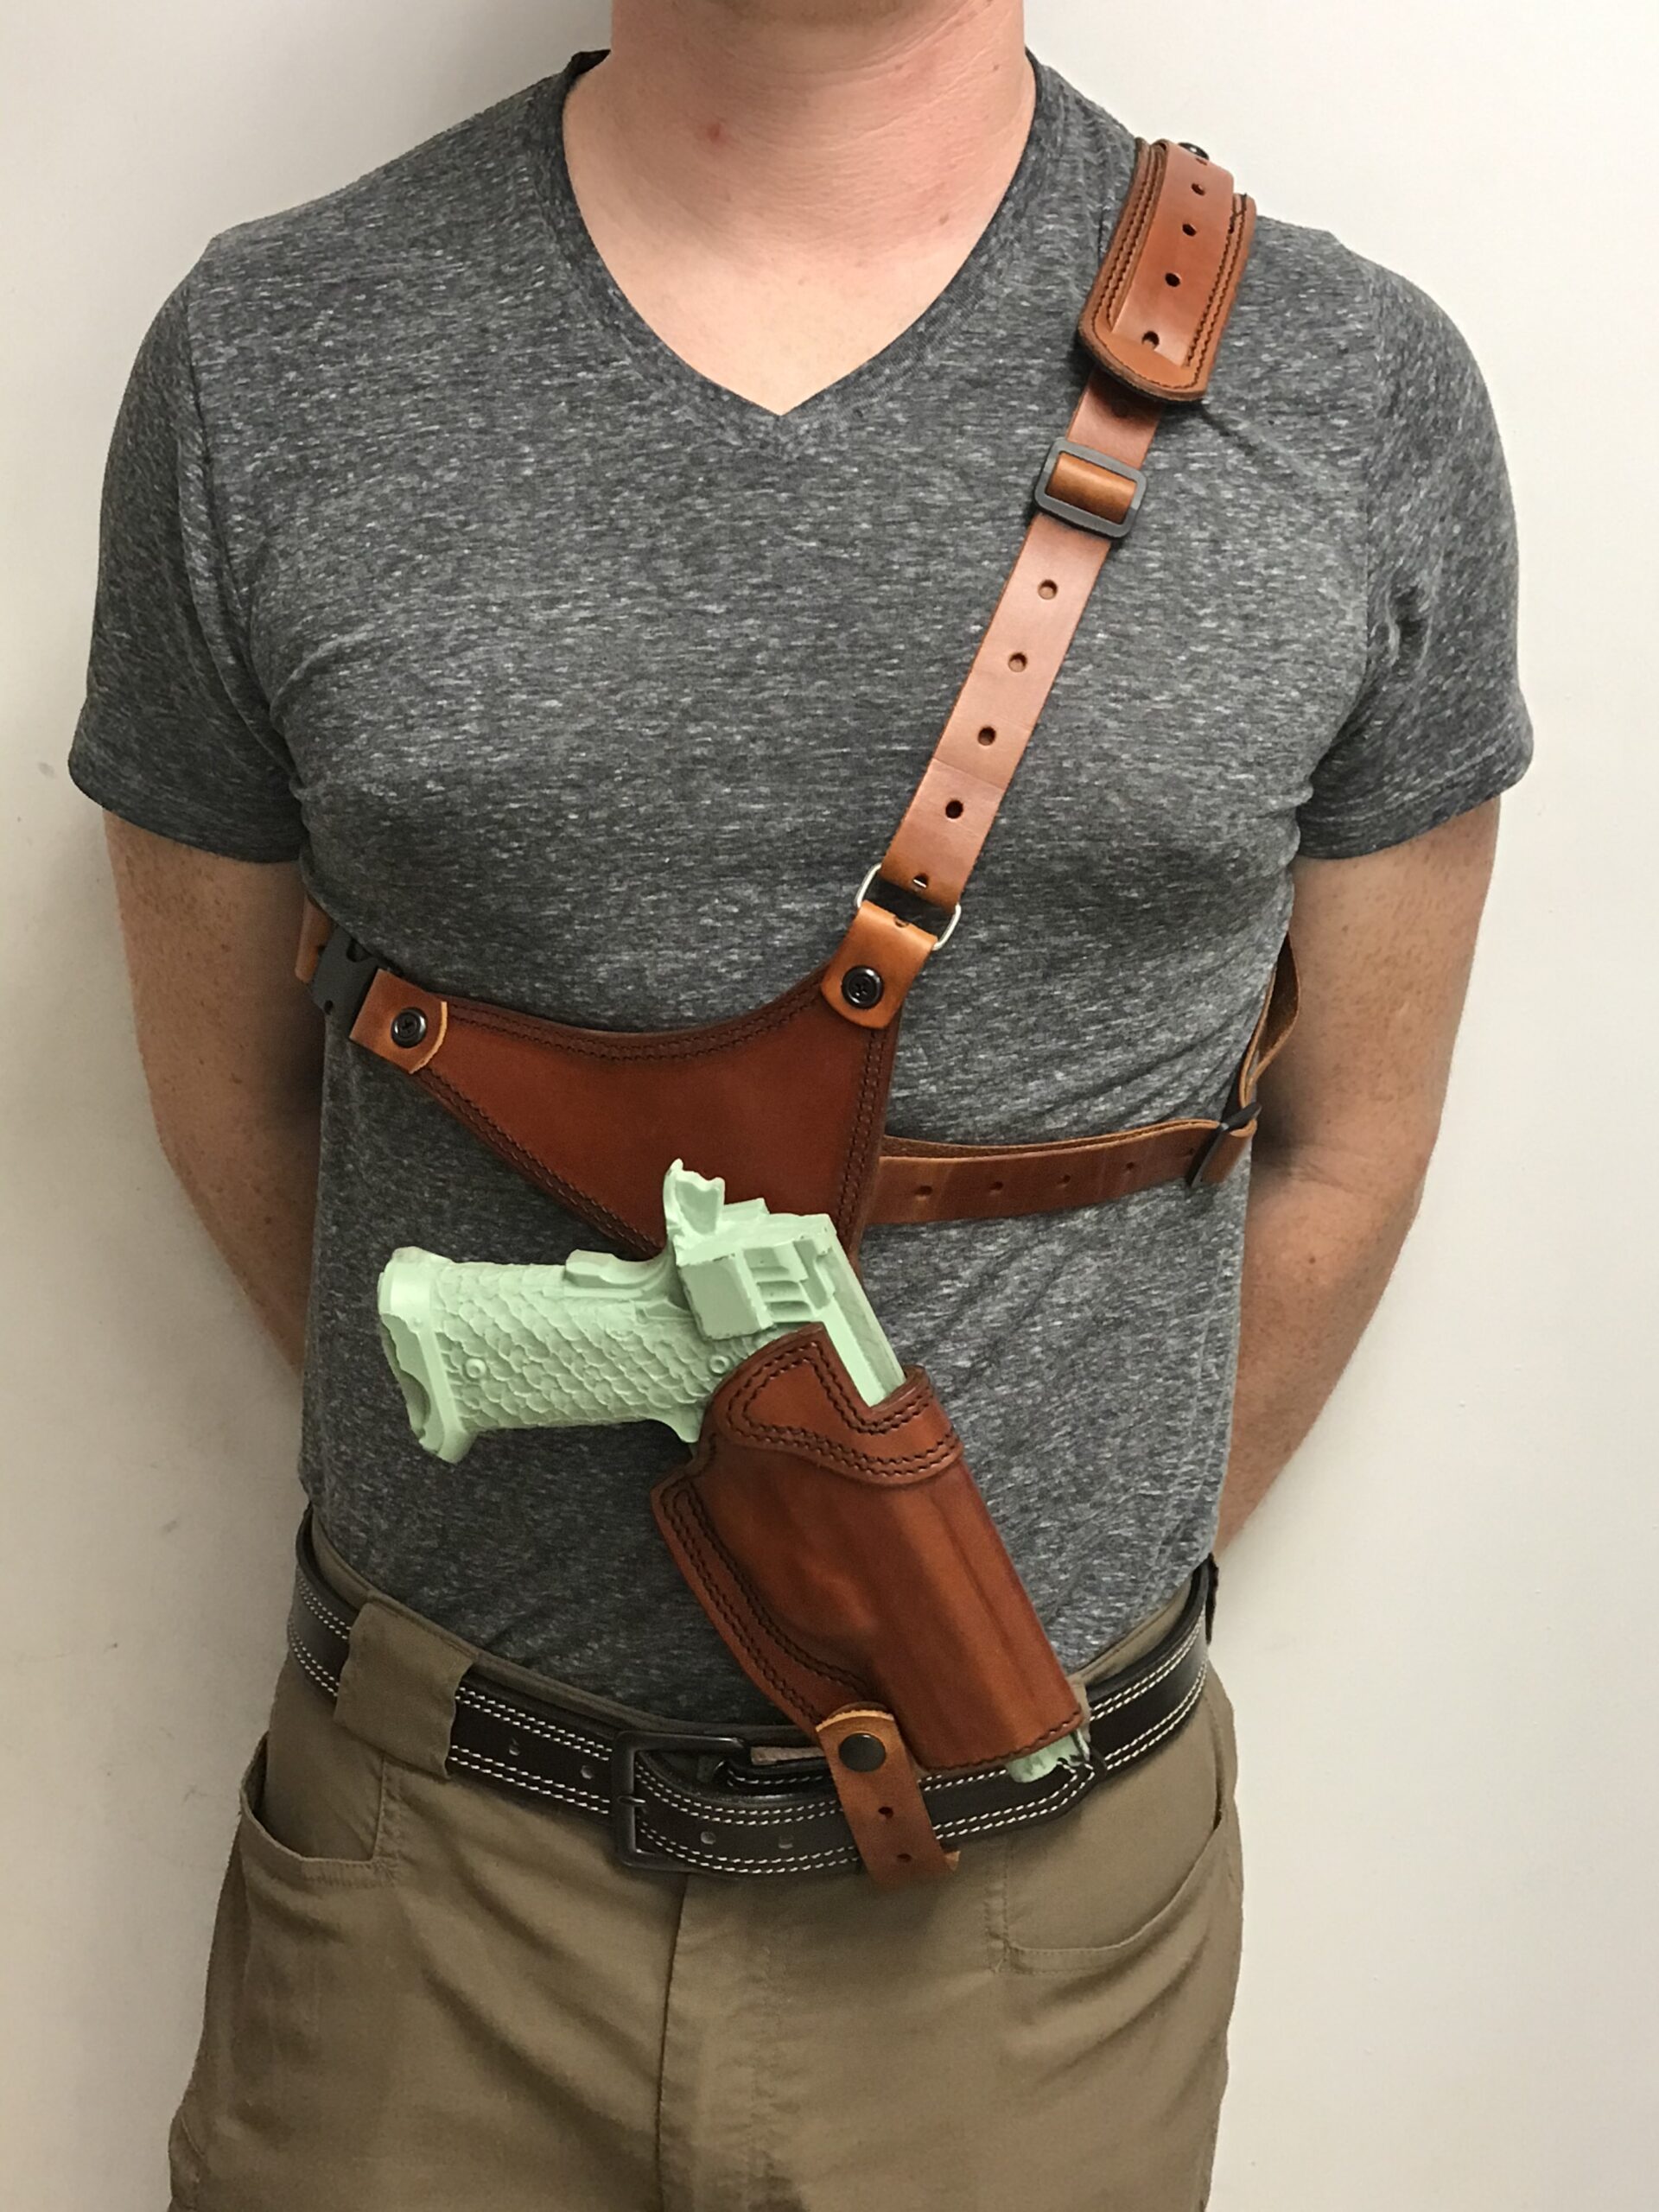 Handmade Leather Tanker Holster - leather holster for chest carry. handmade  in the USA